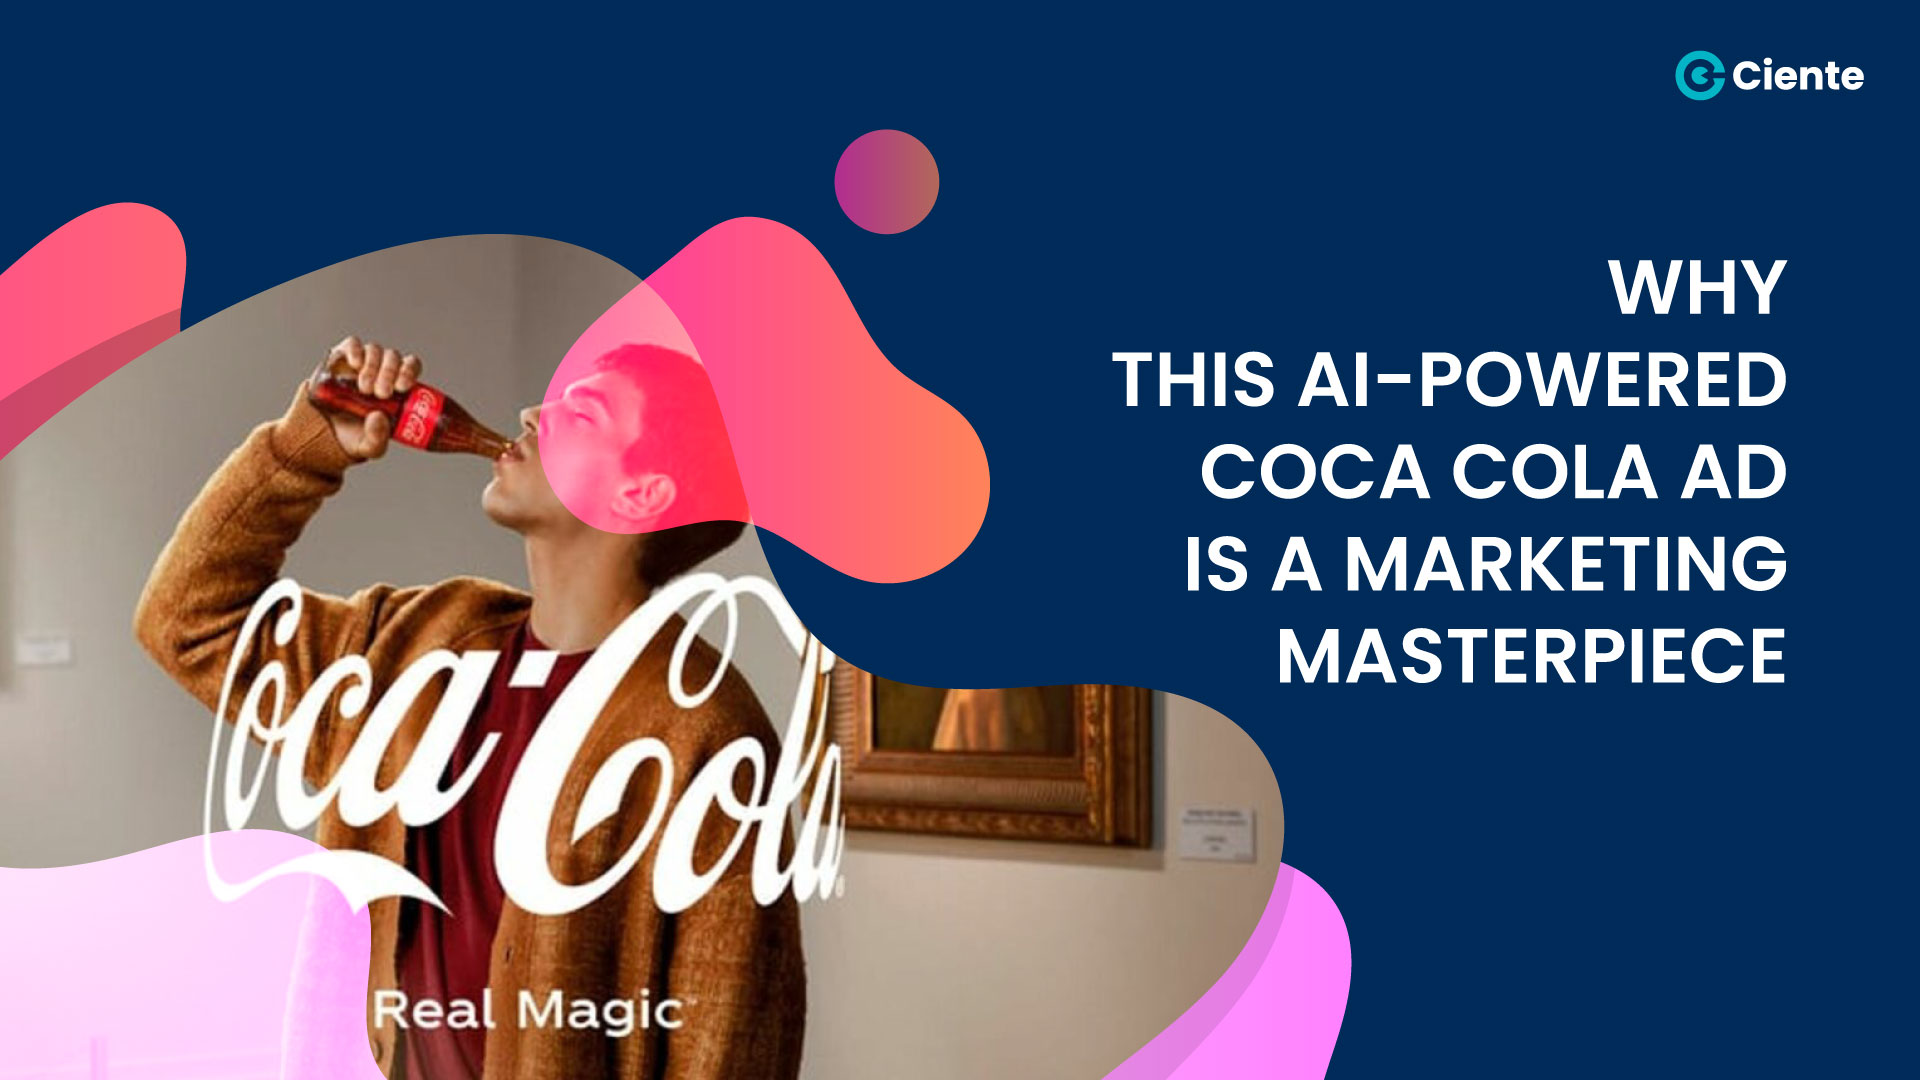 Why this AI-powered Coca Cola ad is a marketing masterpiece